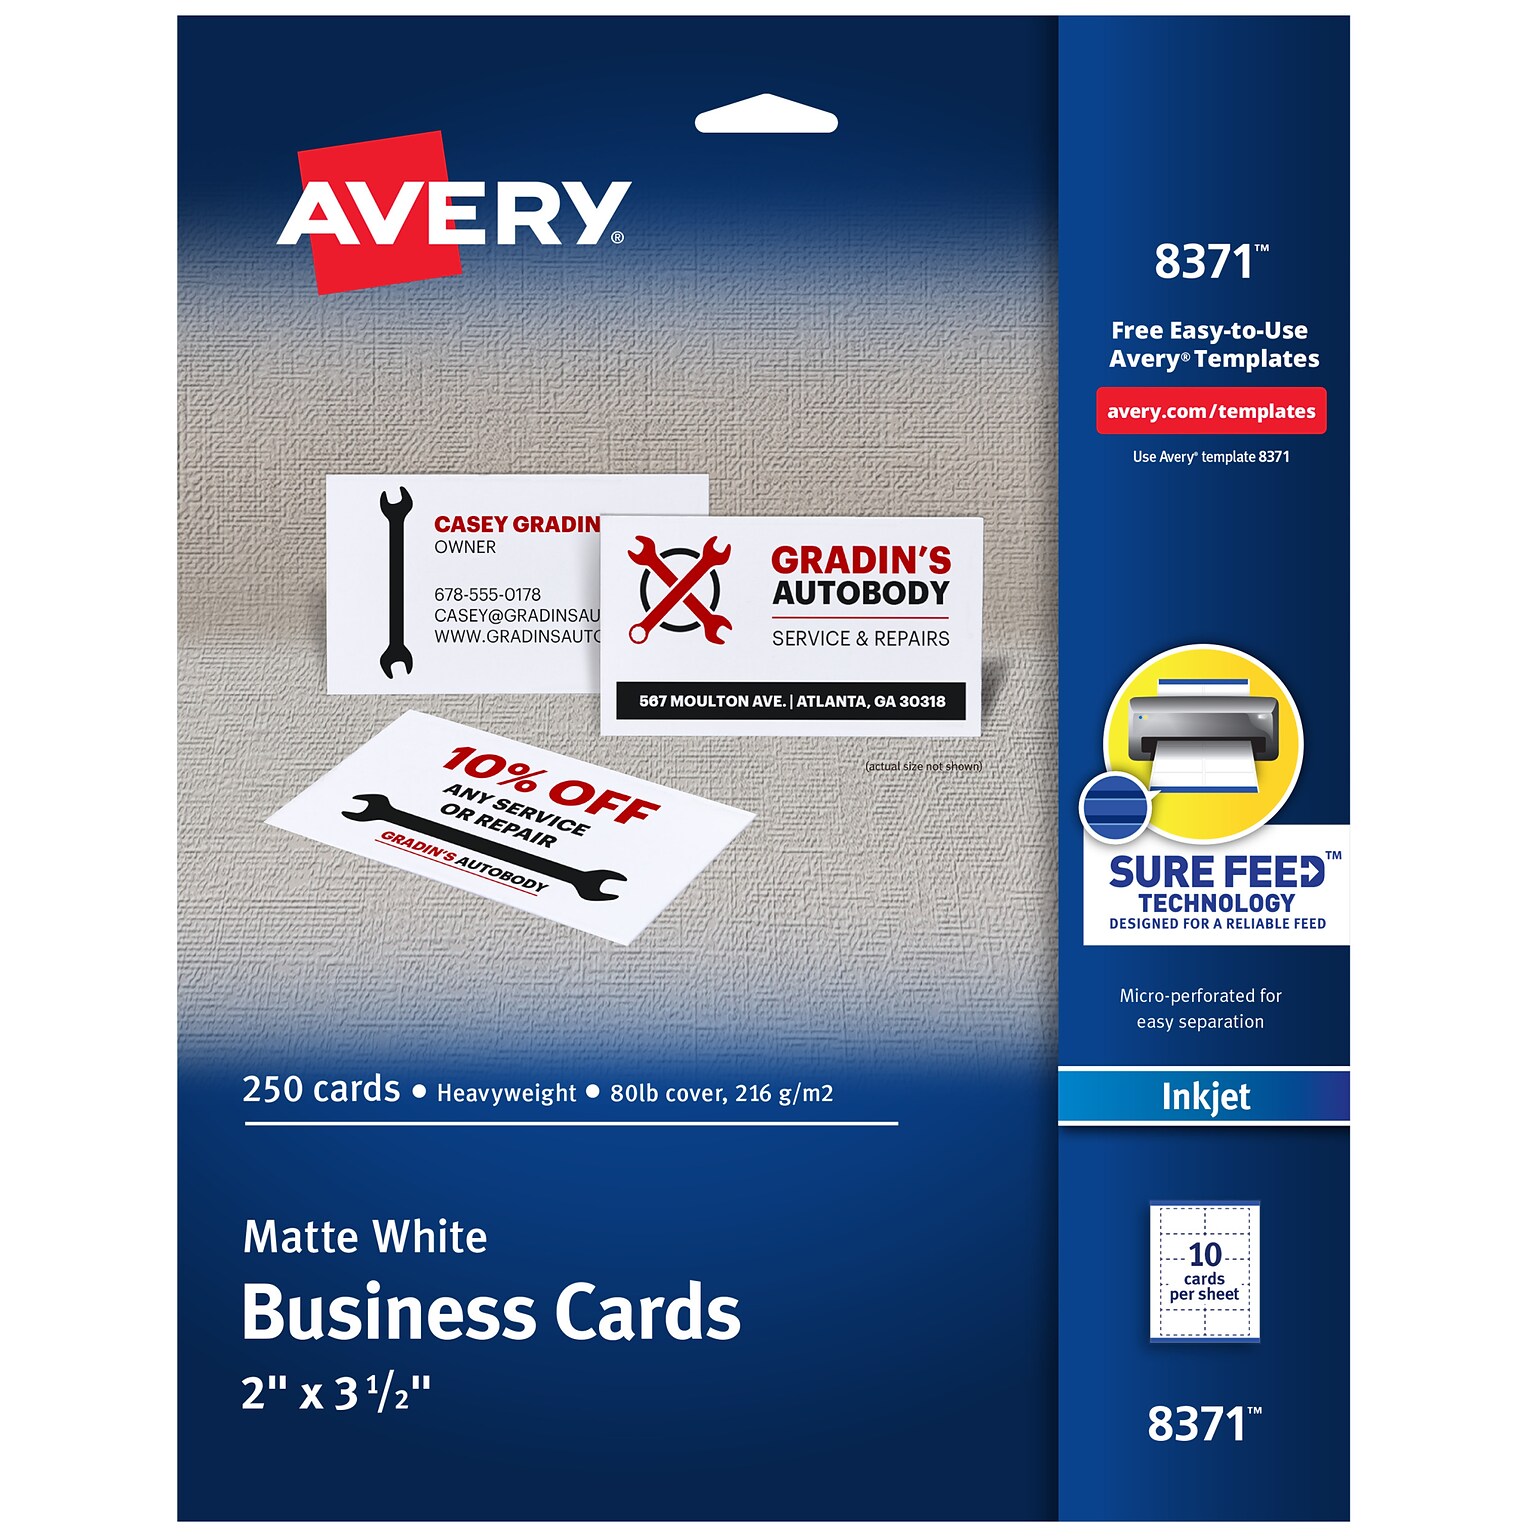 Avery Microperforated Business Cards, 2 x 3 1/2, Matte White, 250 Per Pack (8371)